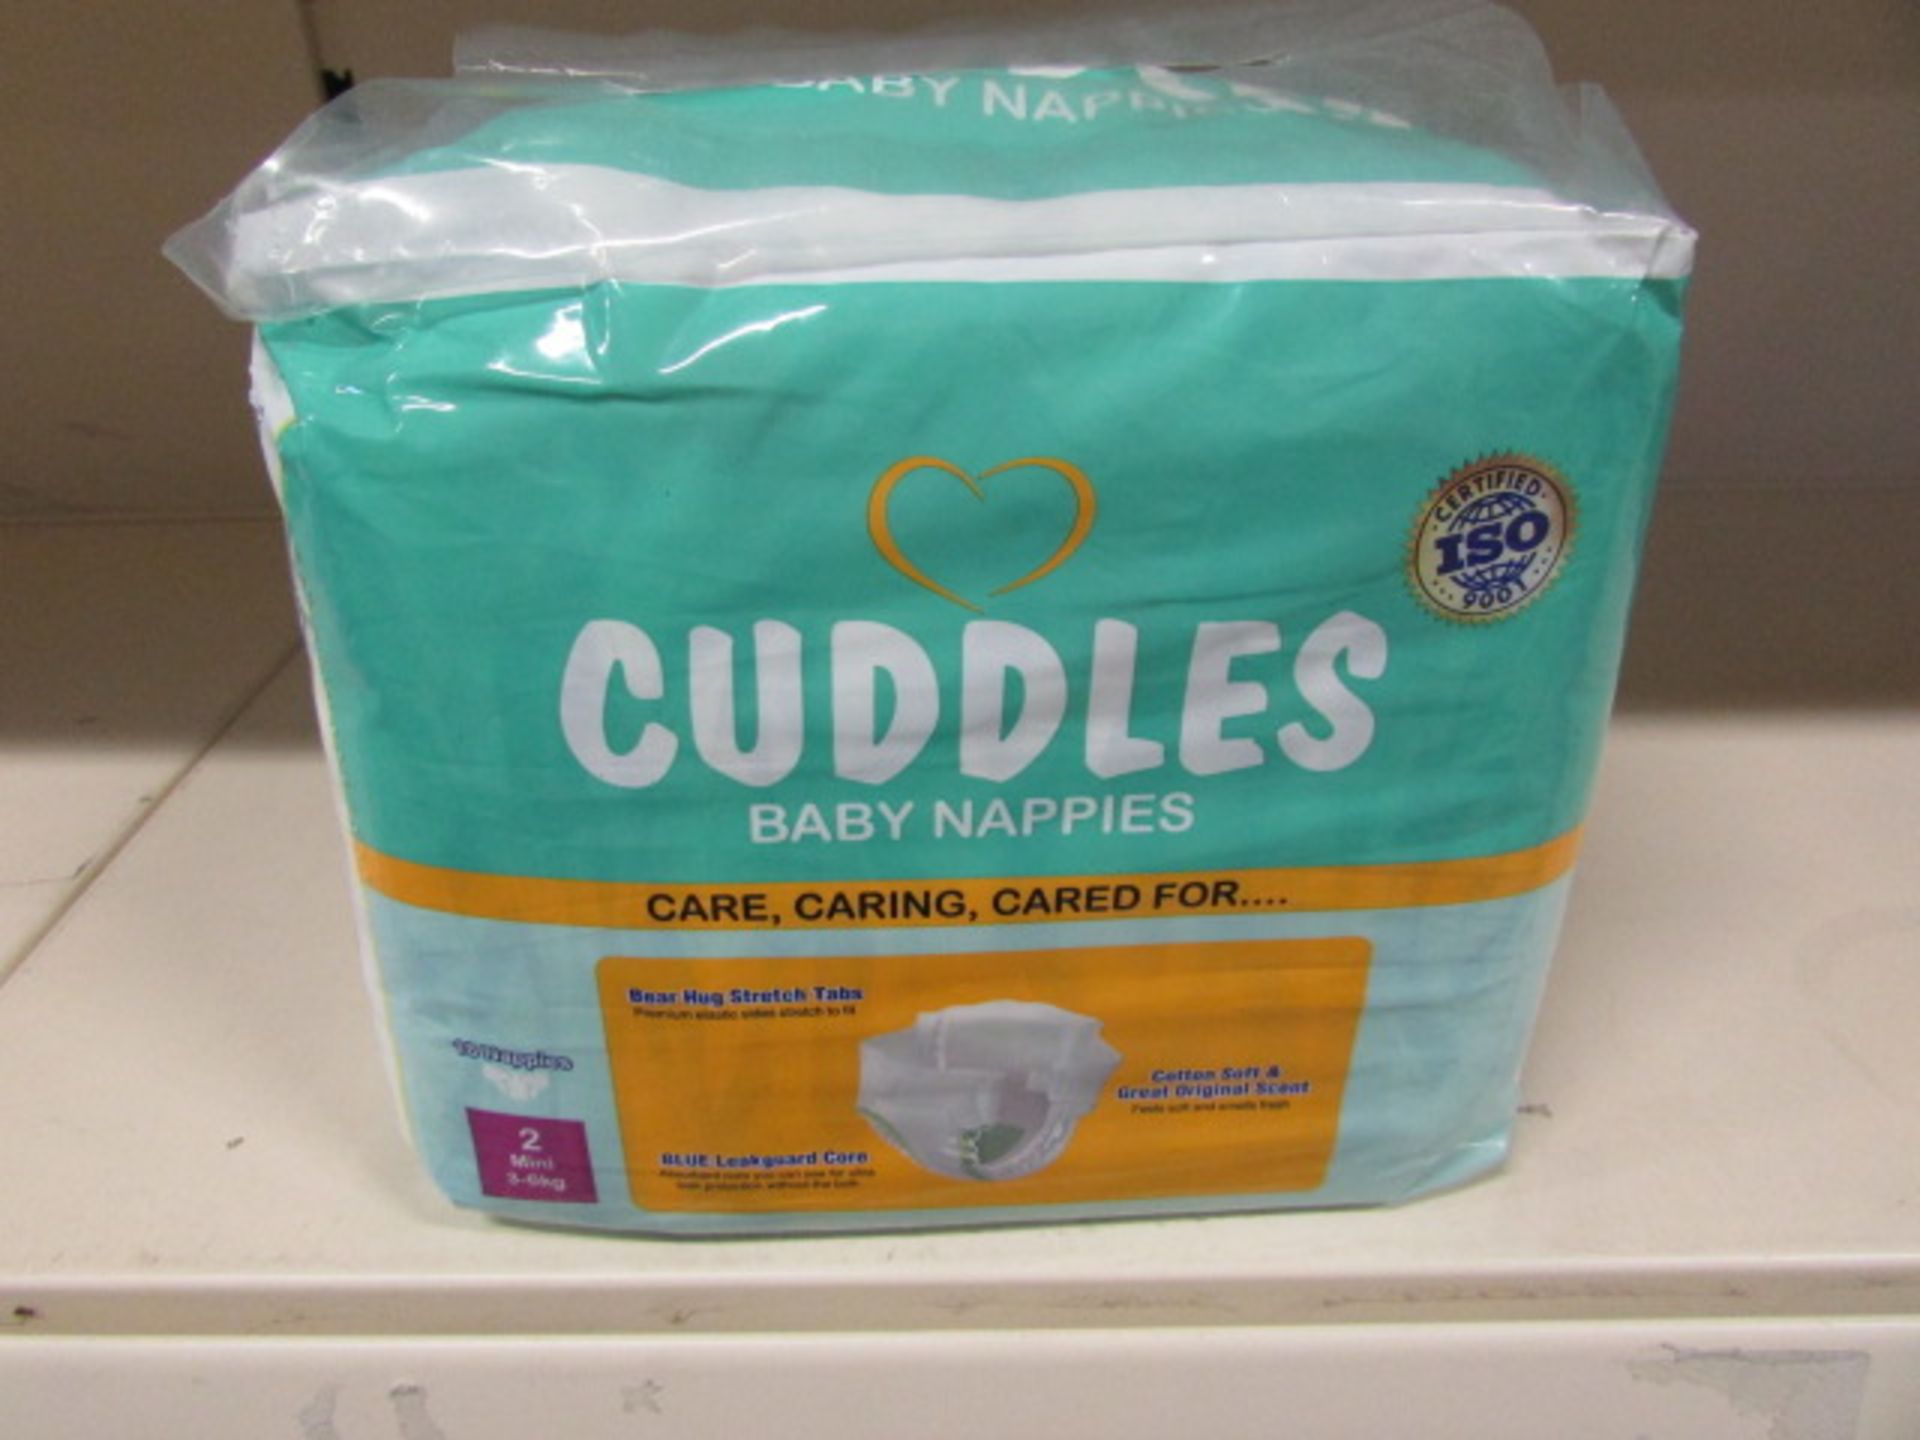 1 x Outer Carton, 10 Packs In An Outer, 18 Nappies in A Pack (180 Nappies In Total) [Size 3] - Image 4 of 6